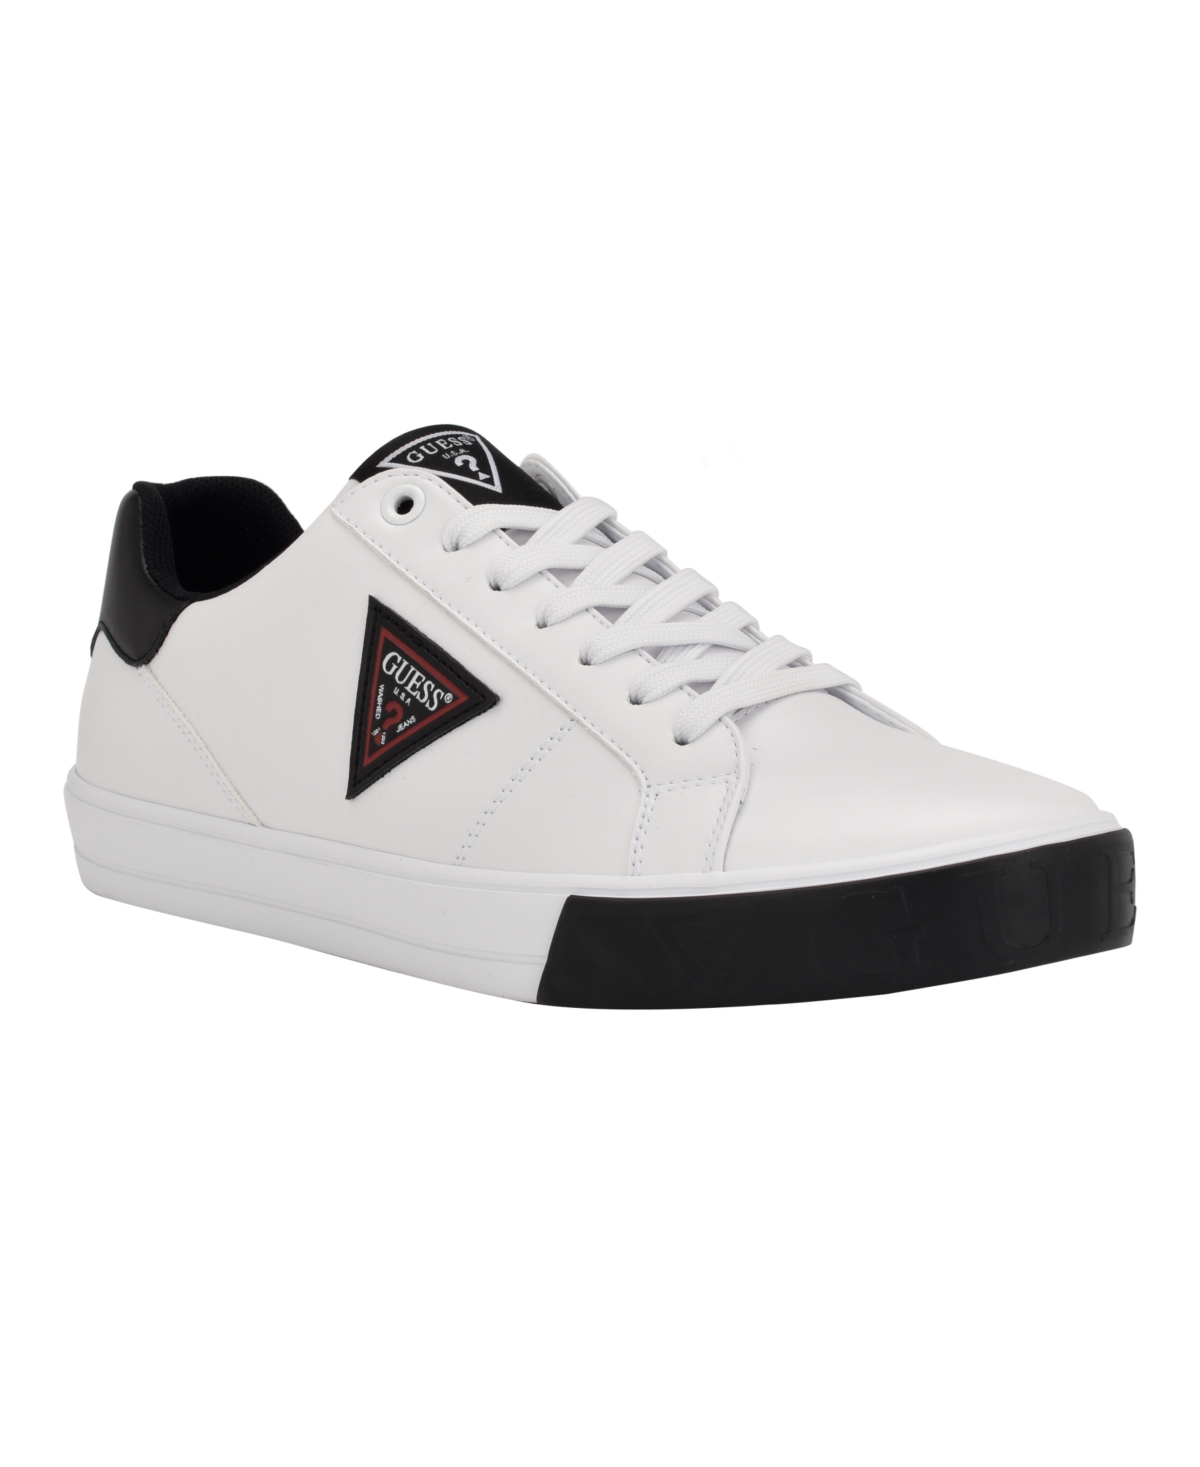 Guess Men's Casual Low Top Lace-up Sneakers Shoes In White/black | ModeSens